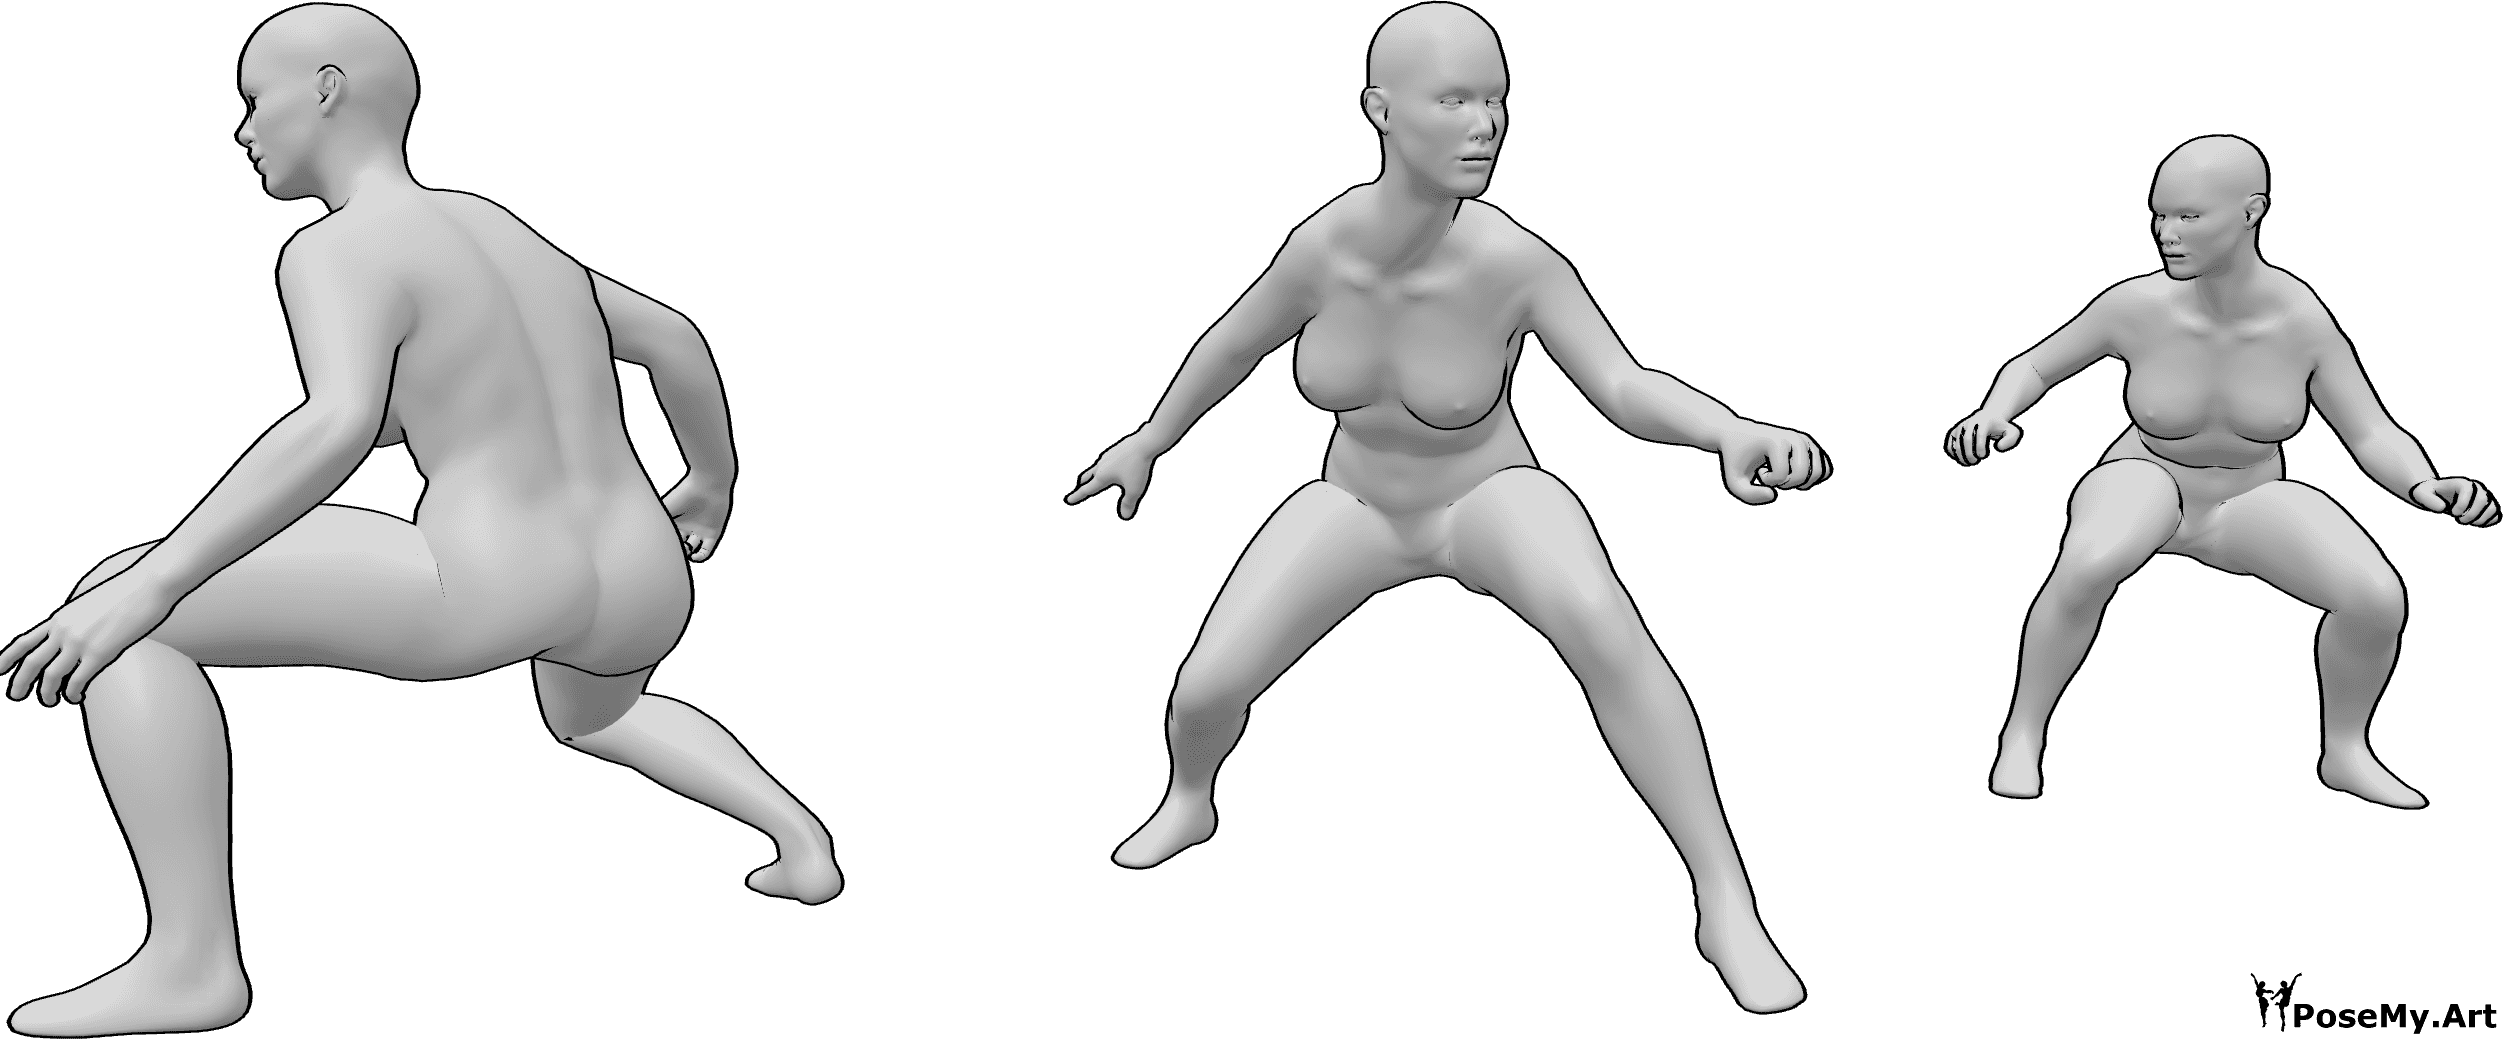 Pose Reference- Three people in a crouching pose - Three realistic women in in a crouching pose